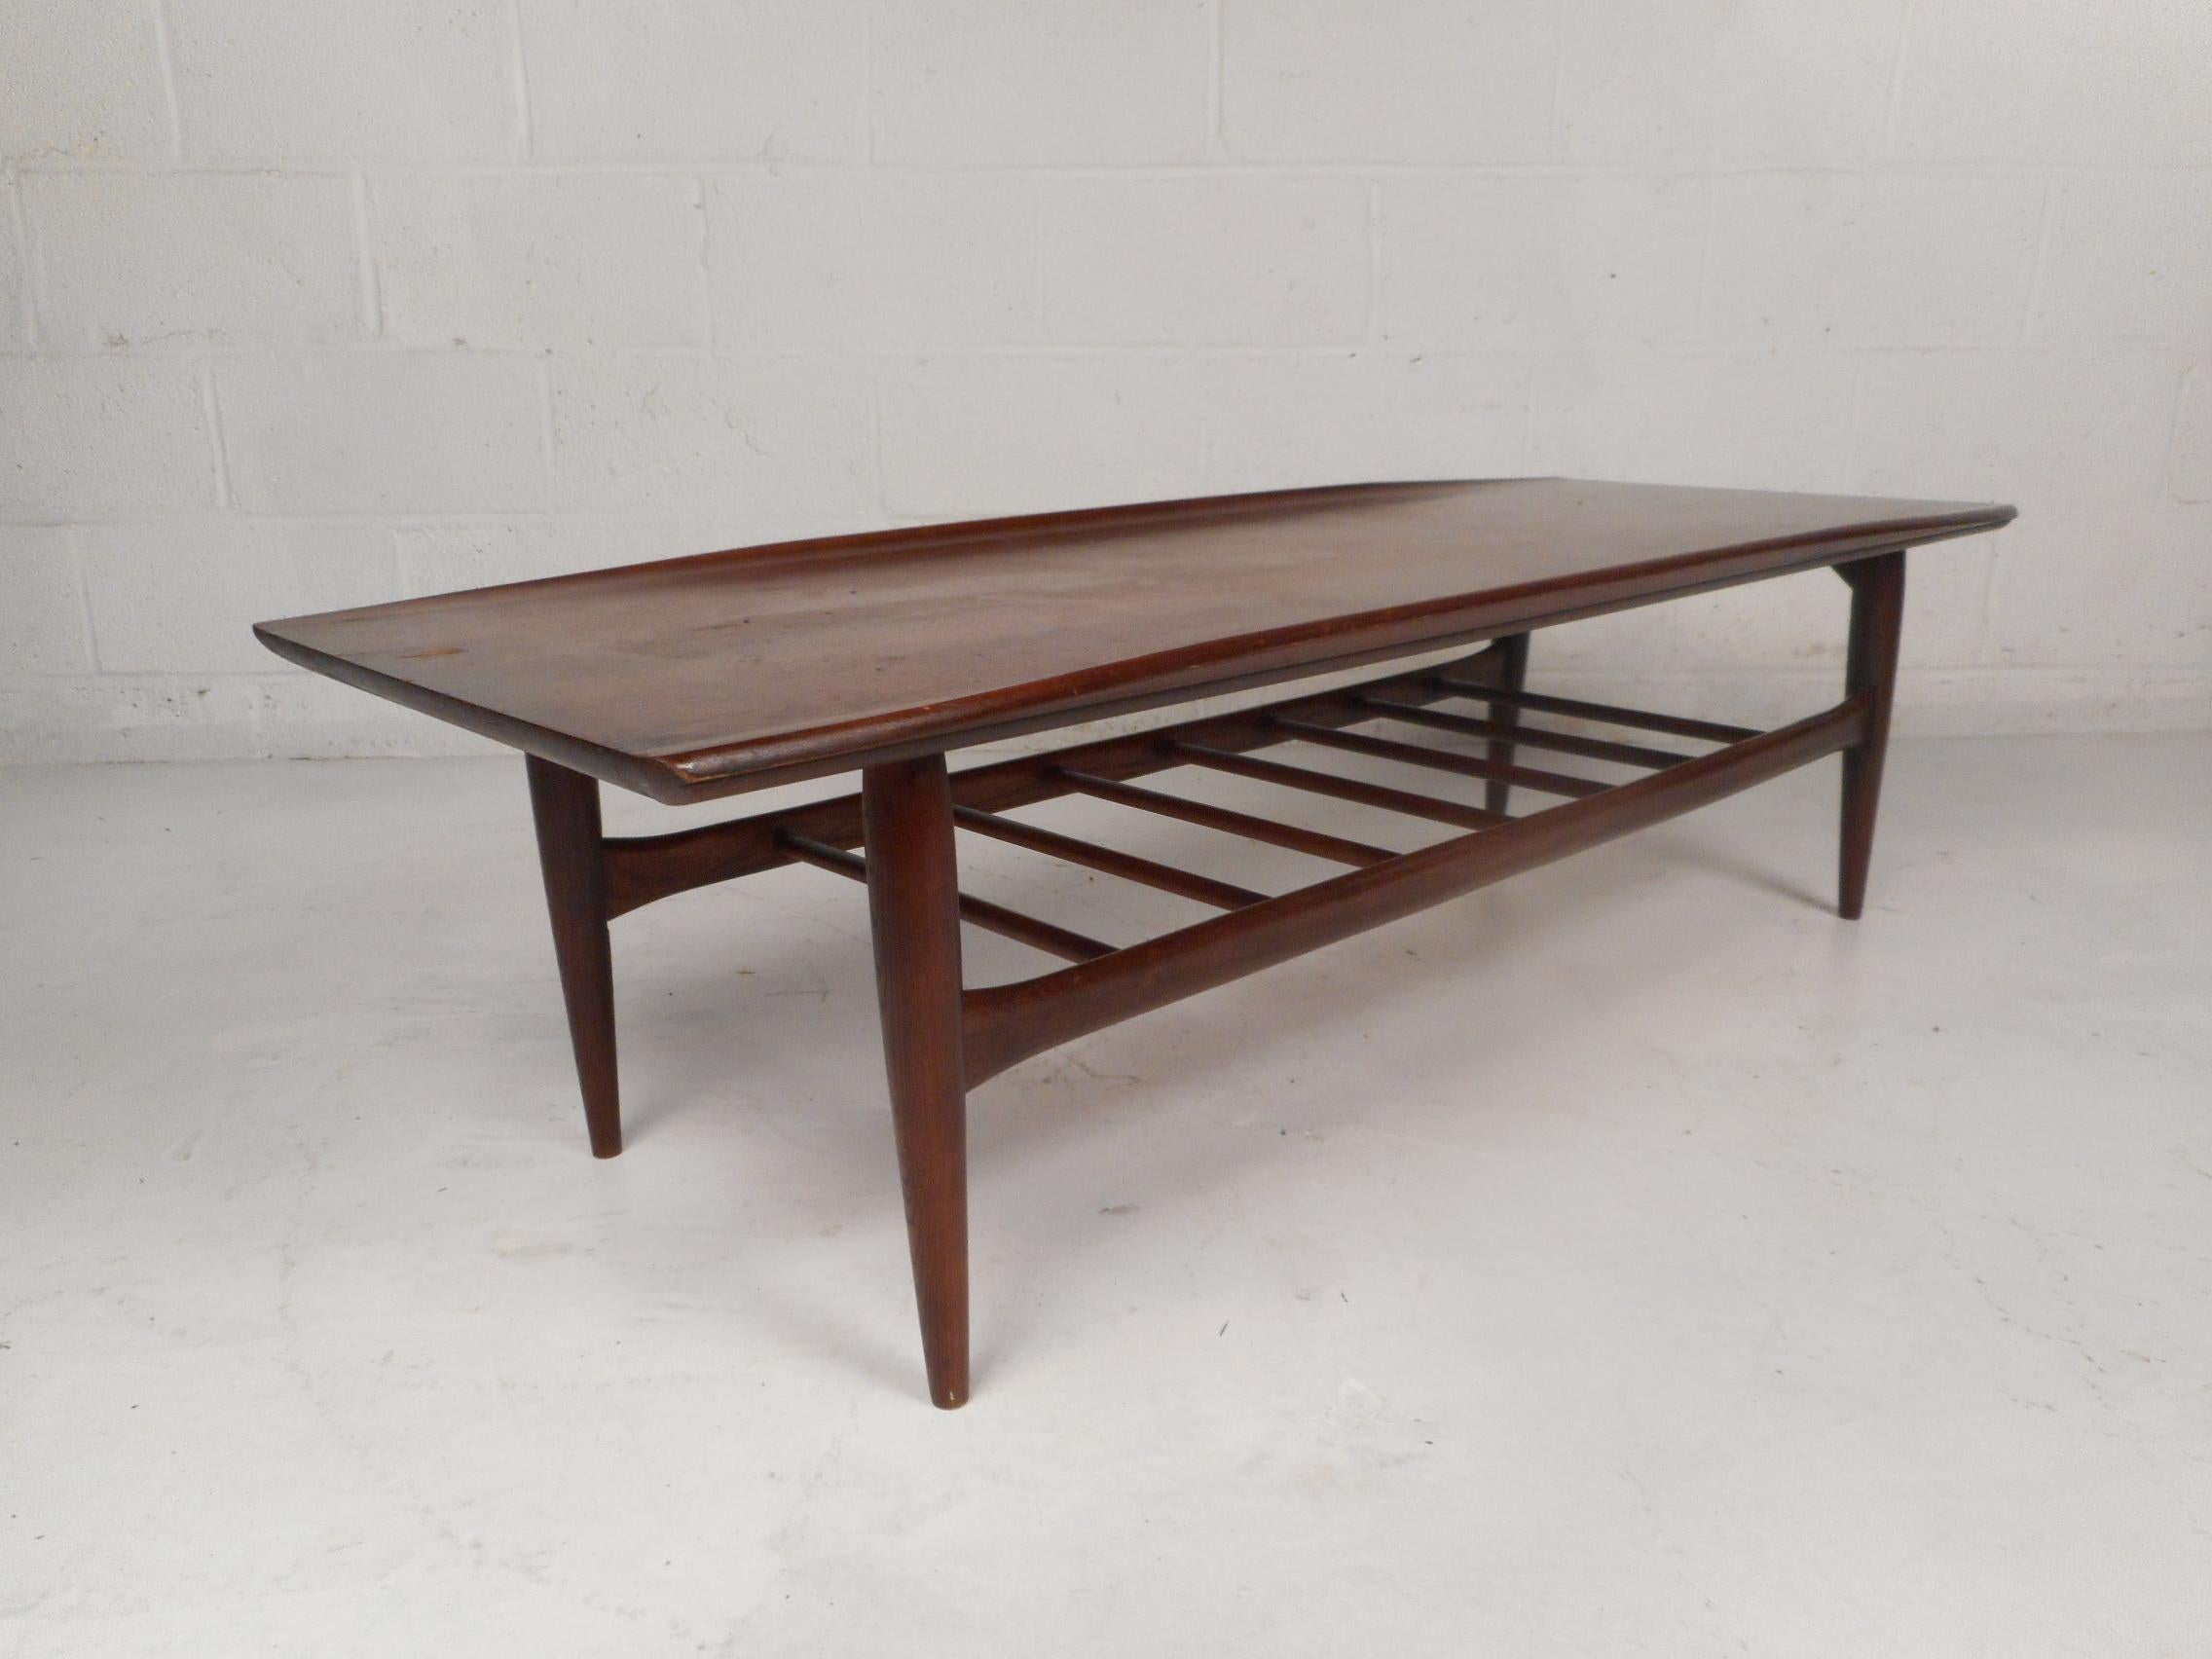 Stylish midcentury coffee table. Sleek design including accented raised edges along the tabletop, numerous stretchers spanning the base, sculpted frame and tapered legs. Beautiful midcentury piece sure to please in any modern interior. Please